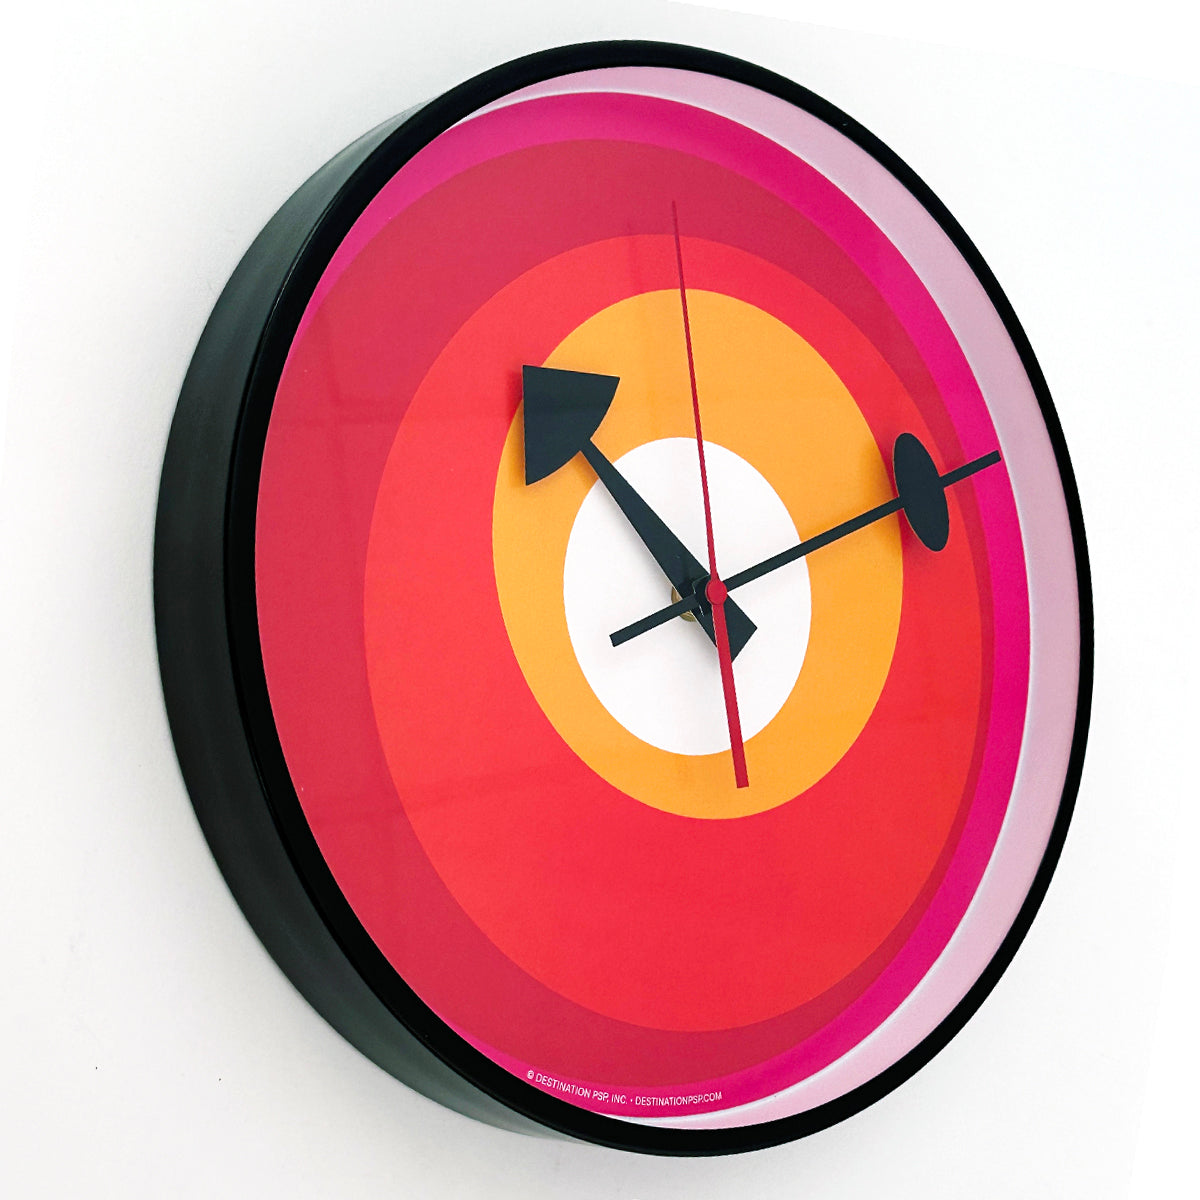 mod wall clock with no numbers but just red, yellow, pink and white circles